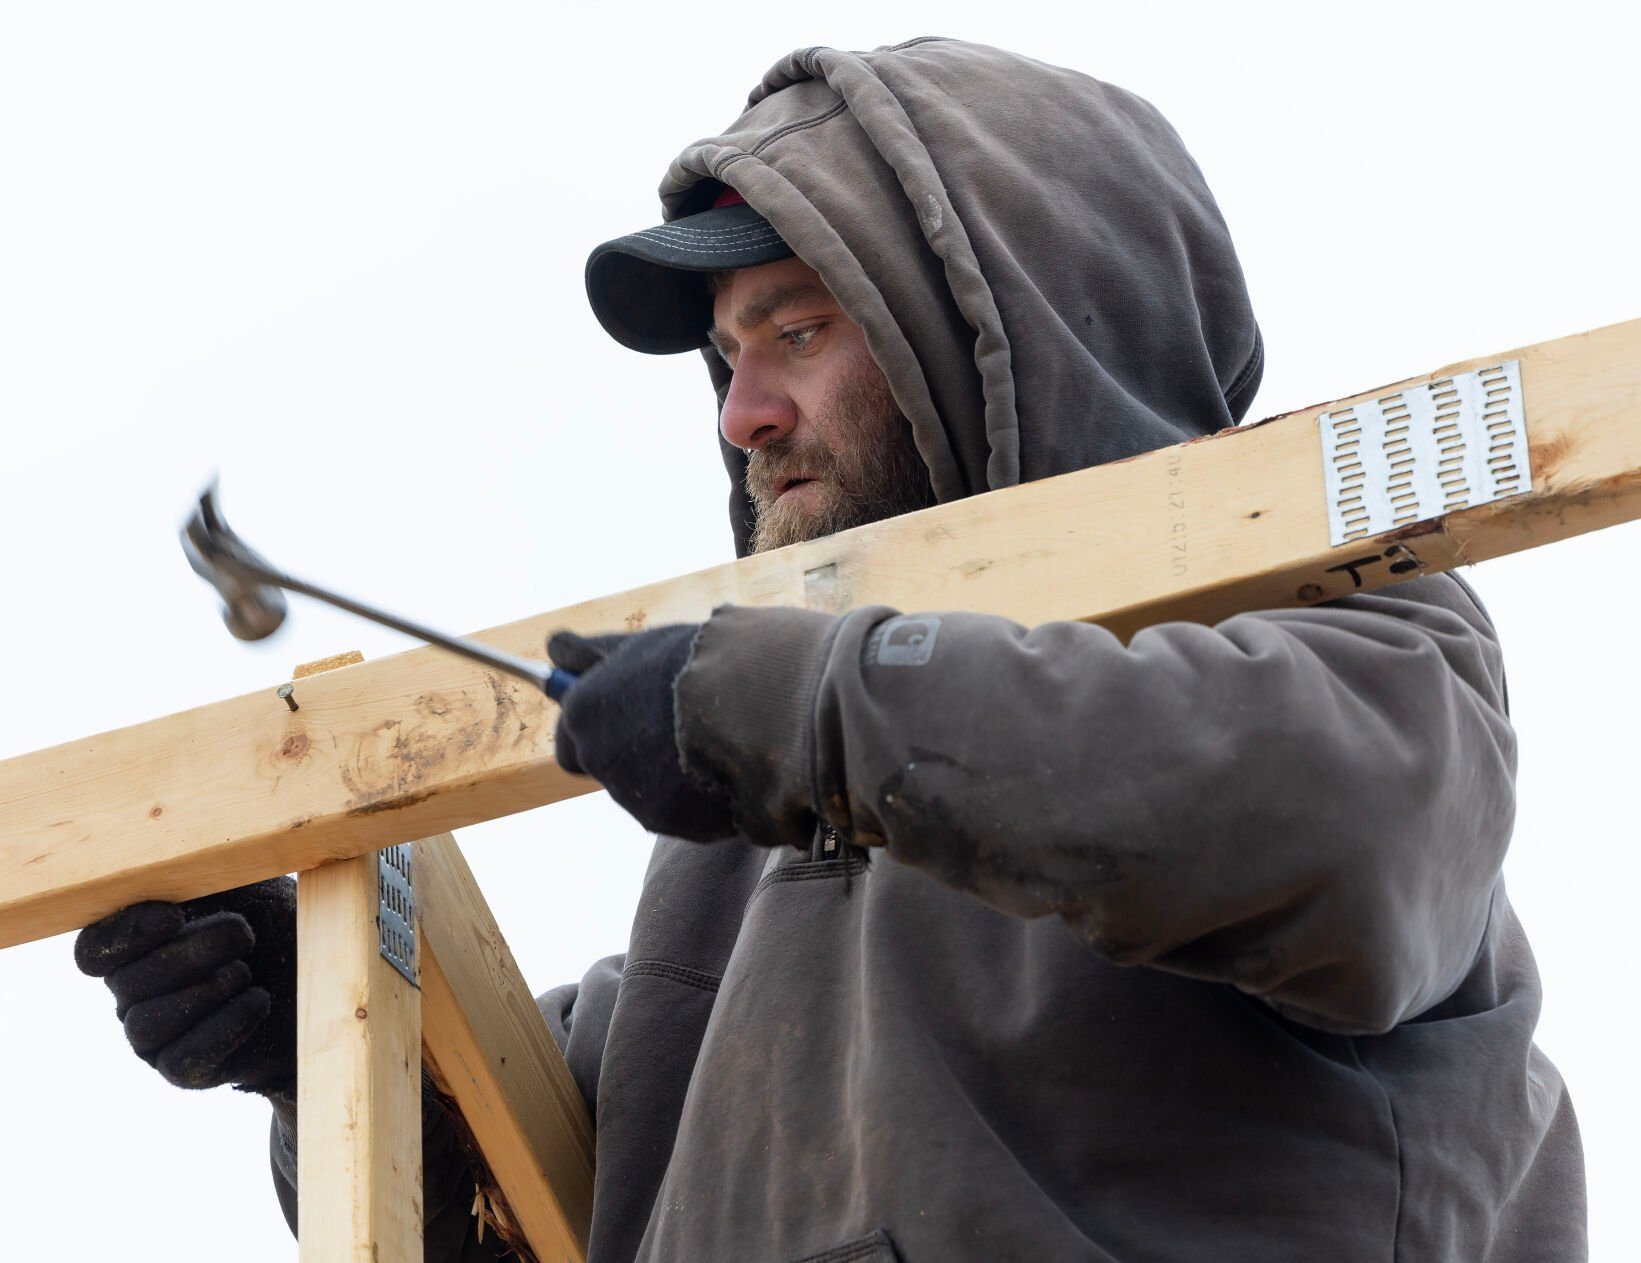 Nate Lange, with Carpenters Construction Services Inc., sets a roof joist into place at a home in Kieler, Wis.    PHOTO CREDIT: Stephen Gassman
Telegraph Herald